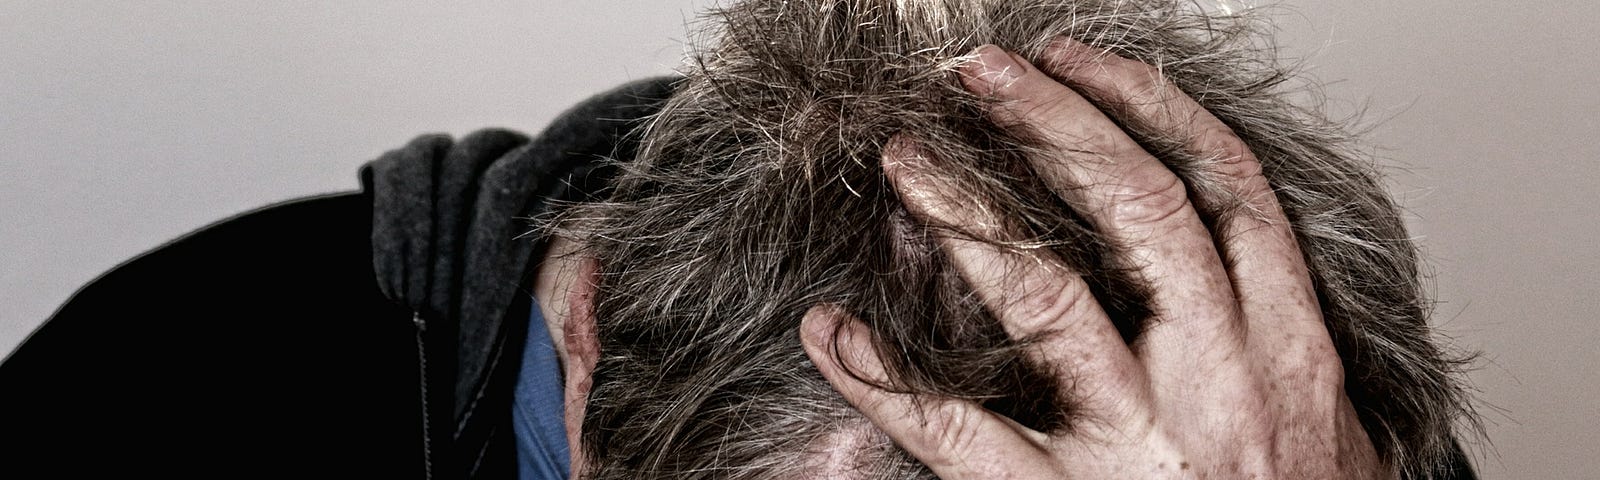 A man holding his head appearing to be exhausted.